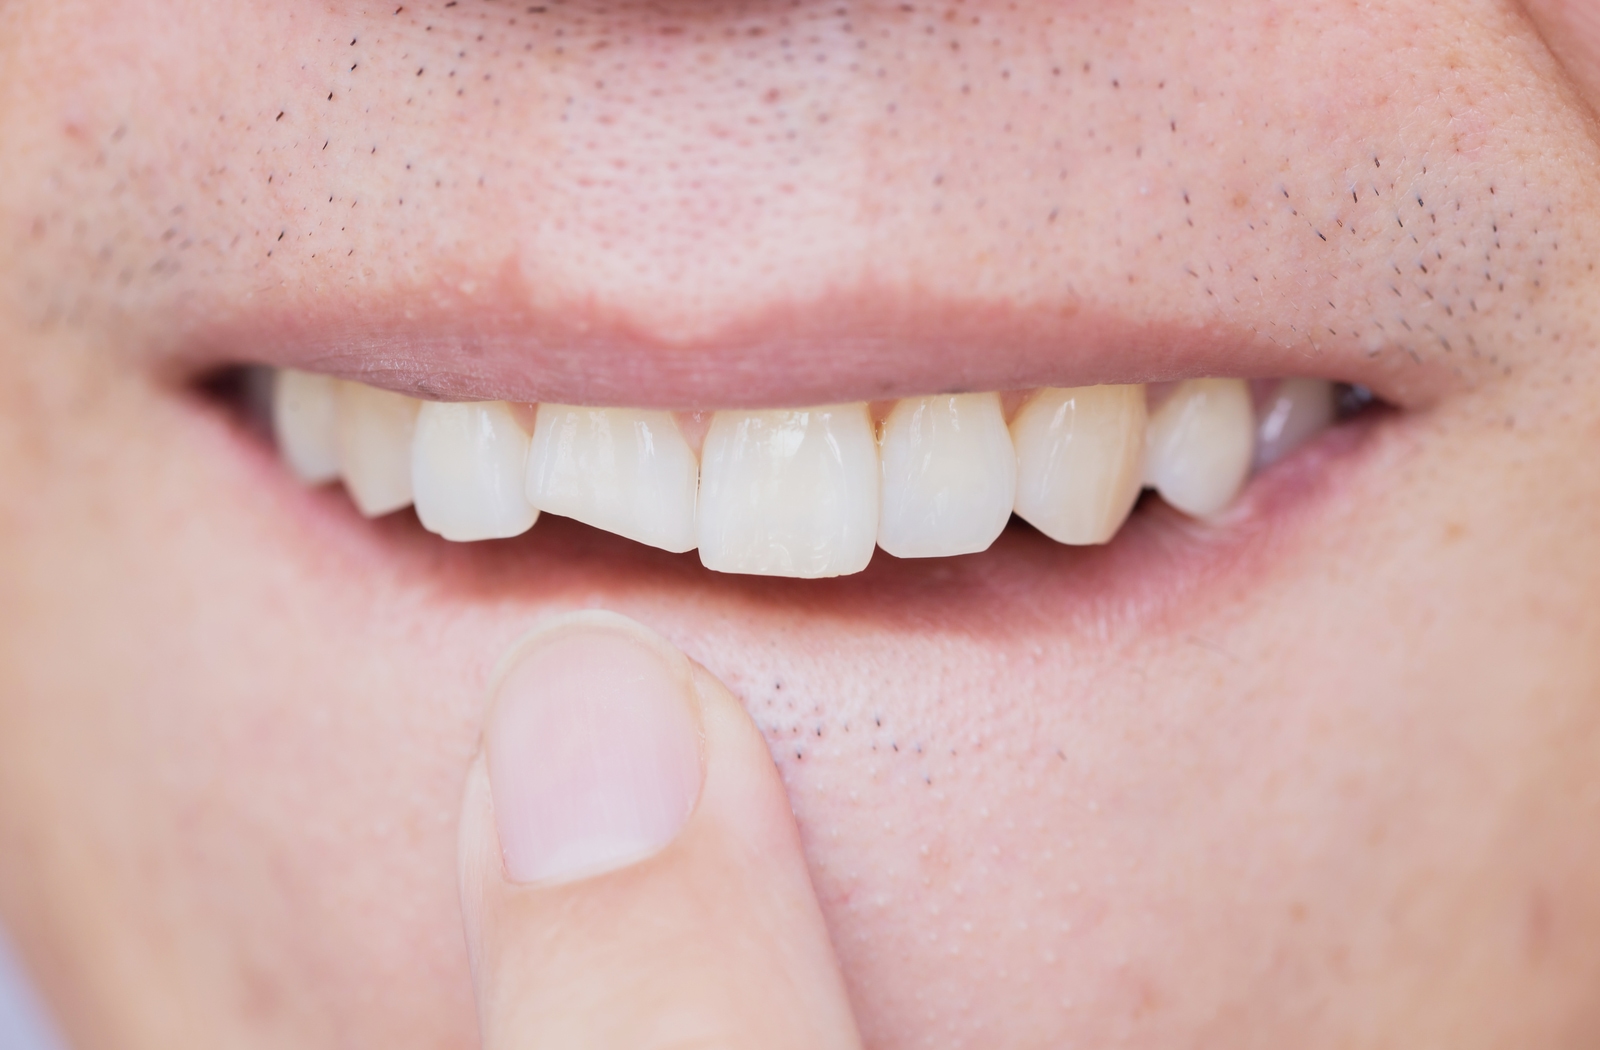 A close up of a person using their finger to point at one of their front teeth that have been broken